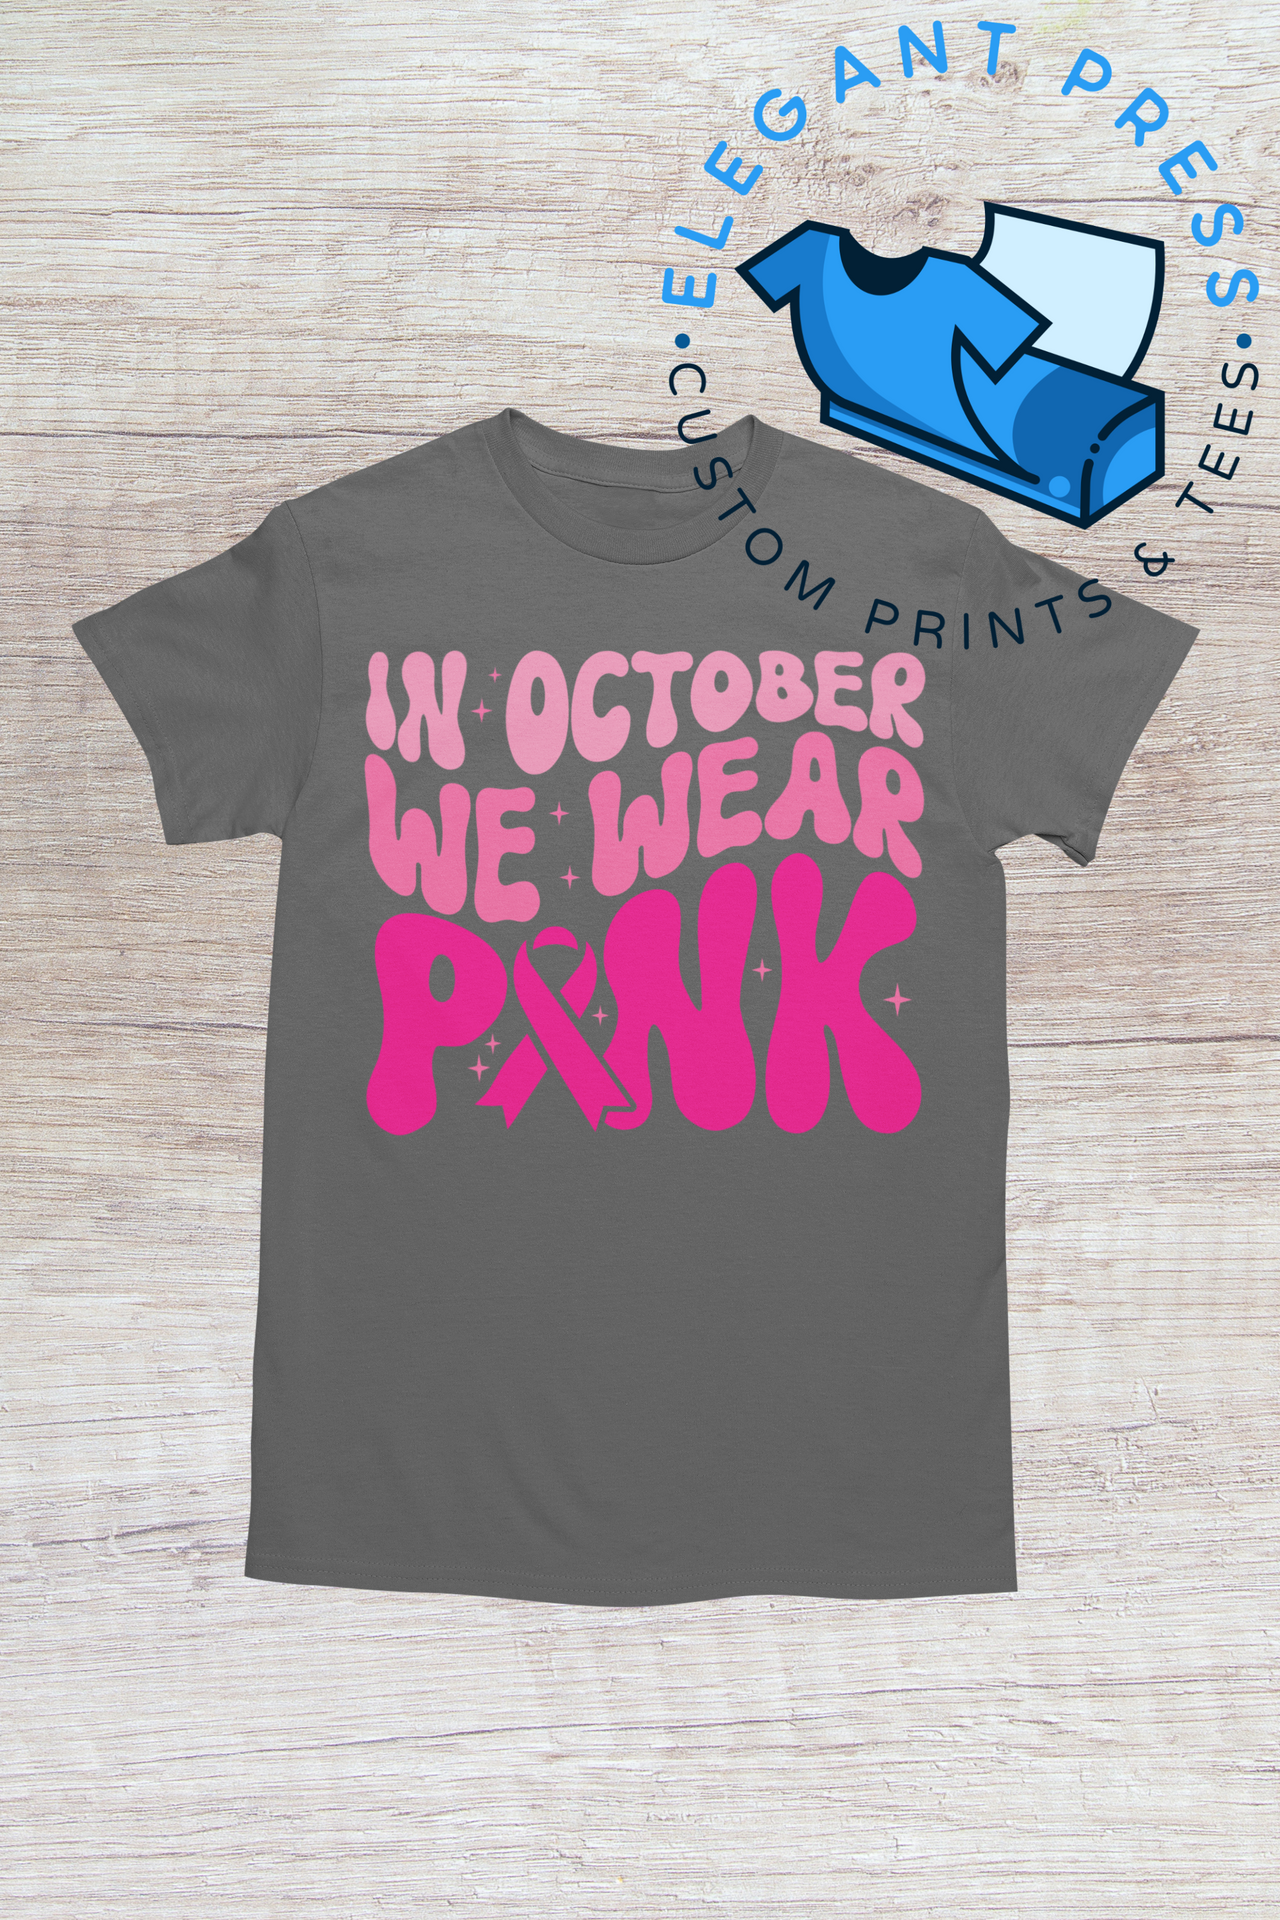 In Oct We Wear Pink (Breast Cancer Awareness) Tee